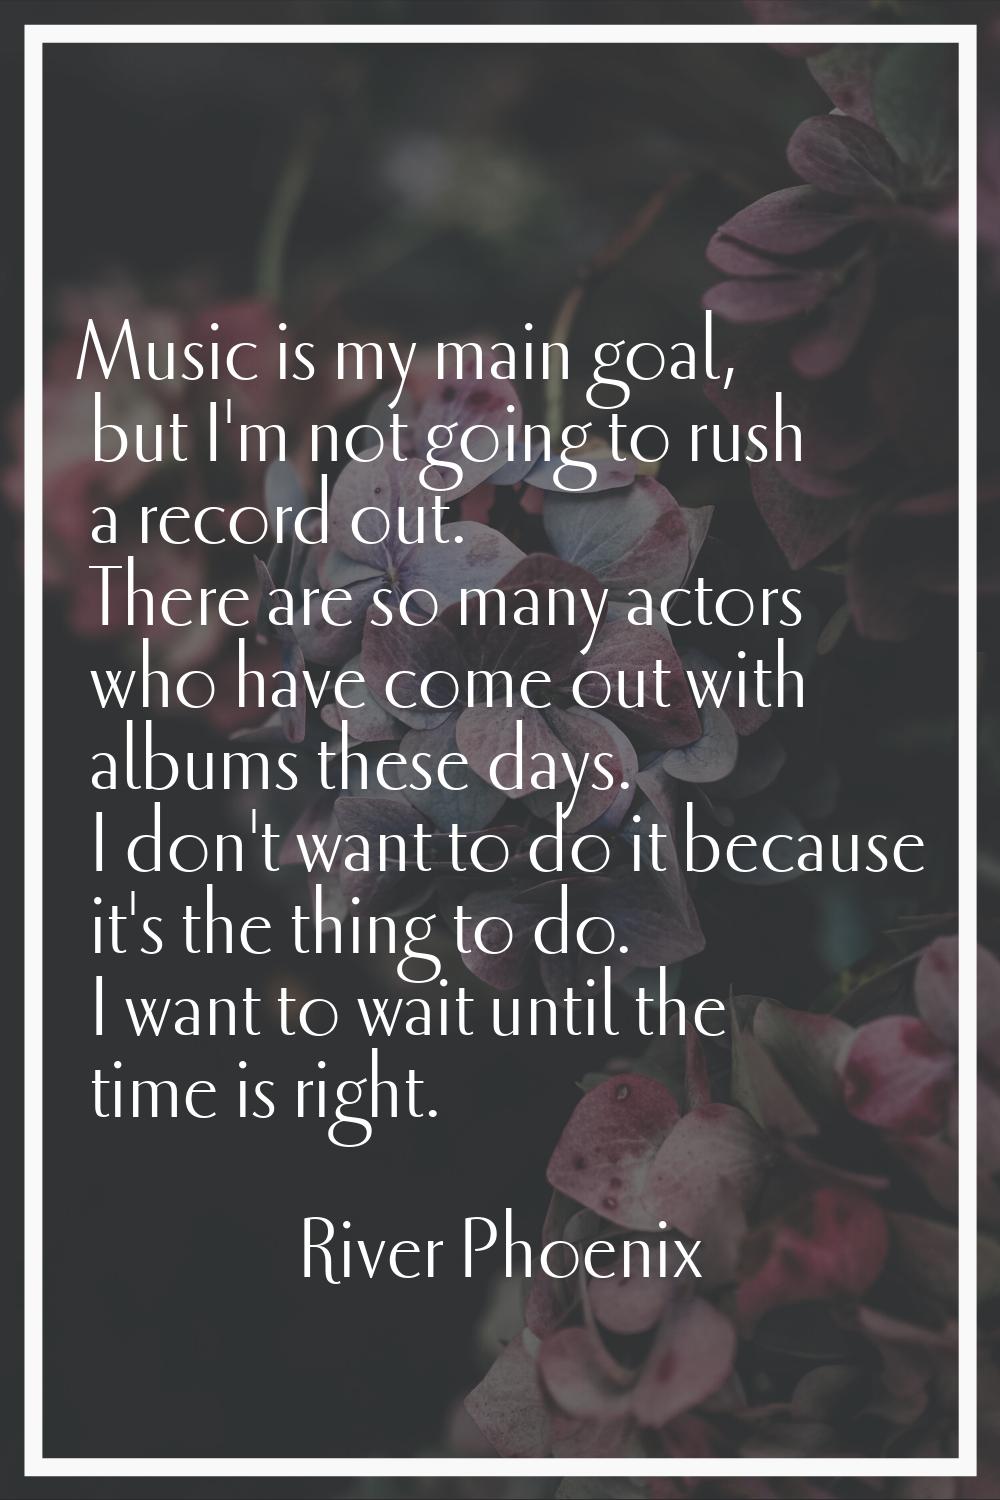 Music is my main goal, but I'm not going to rush a record out. There are so many actors who have co